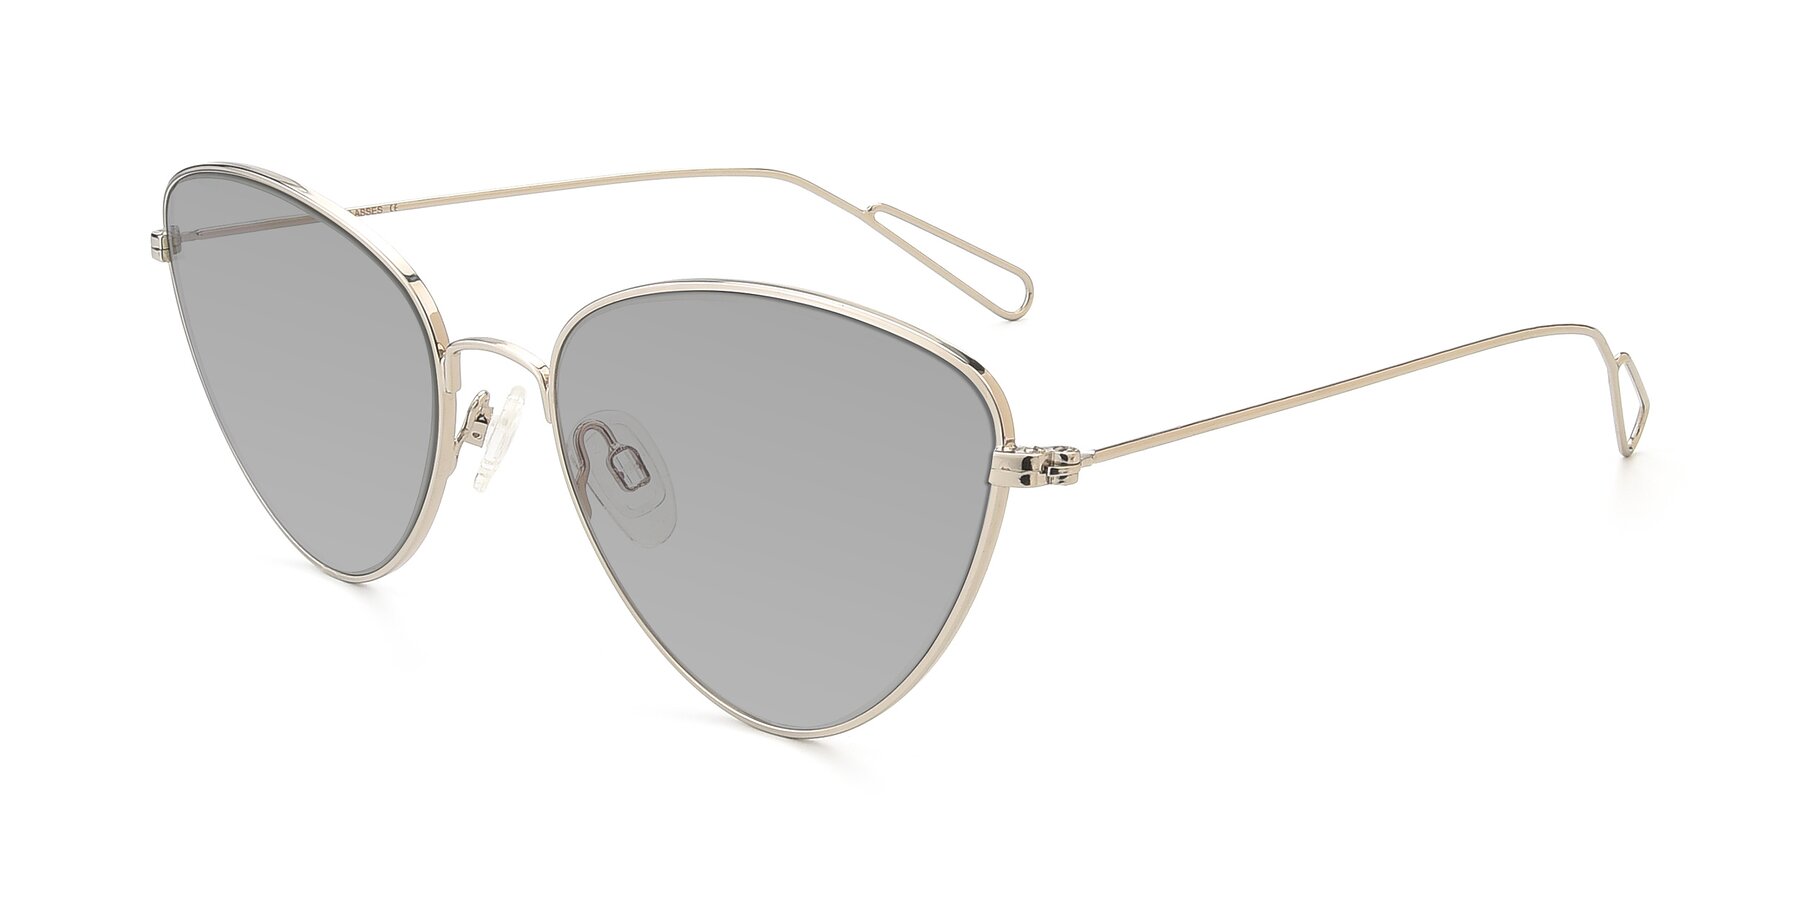 Angle of Butterfly Effect in Silver with Light Gray Tinted Lenses